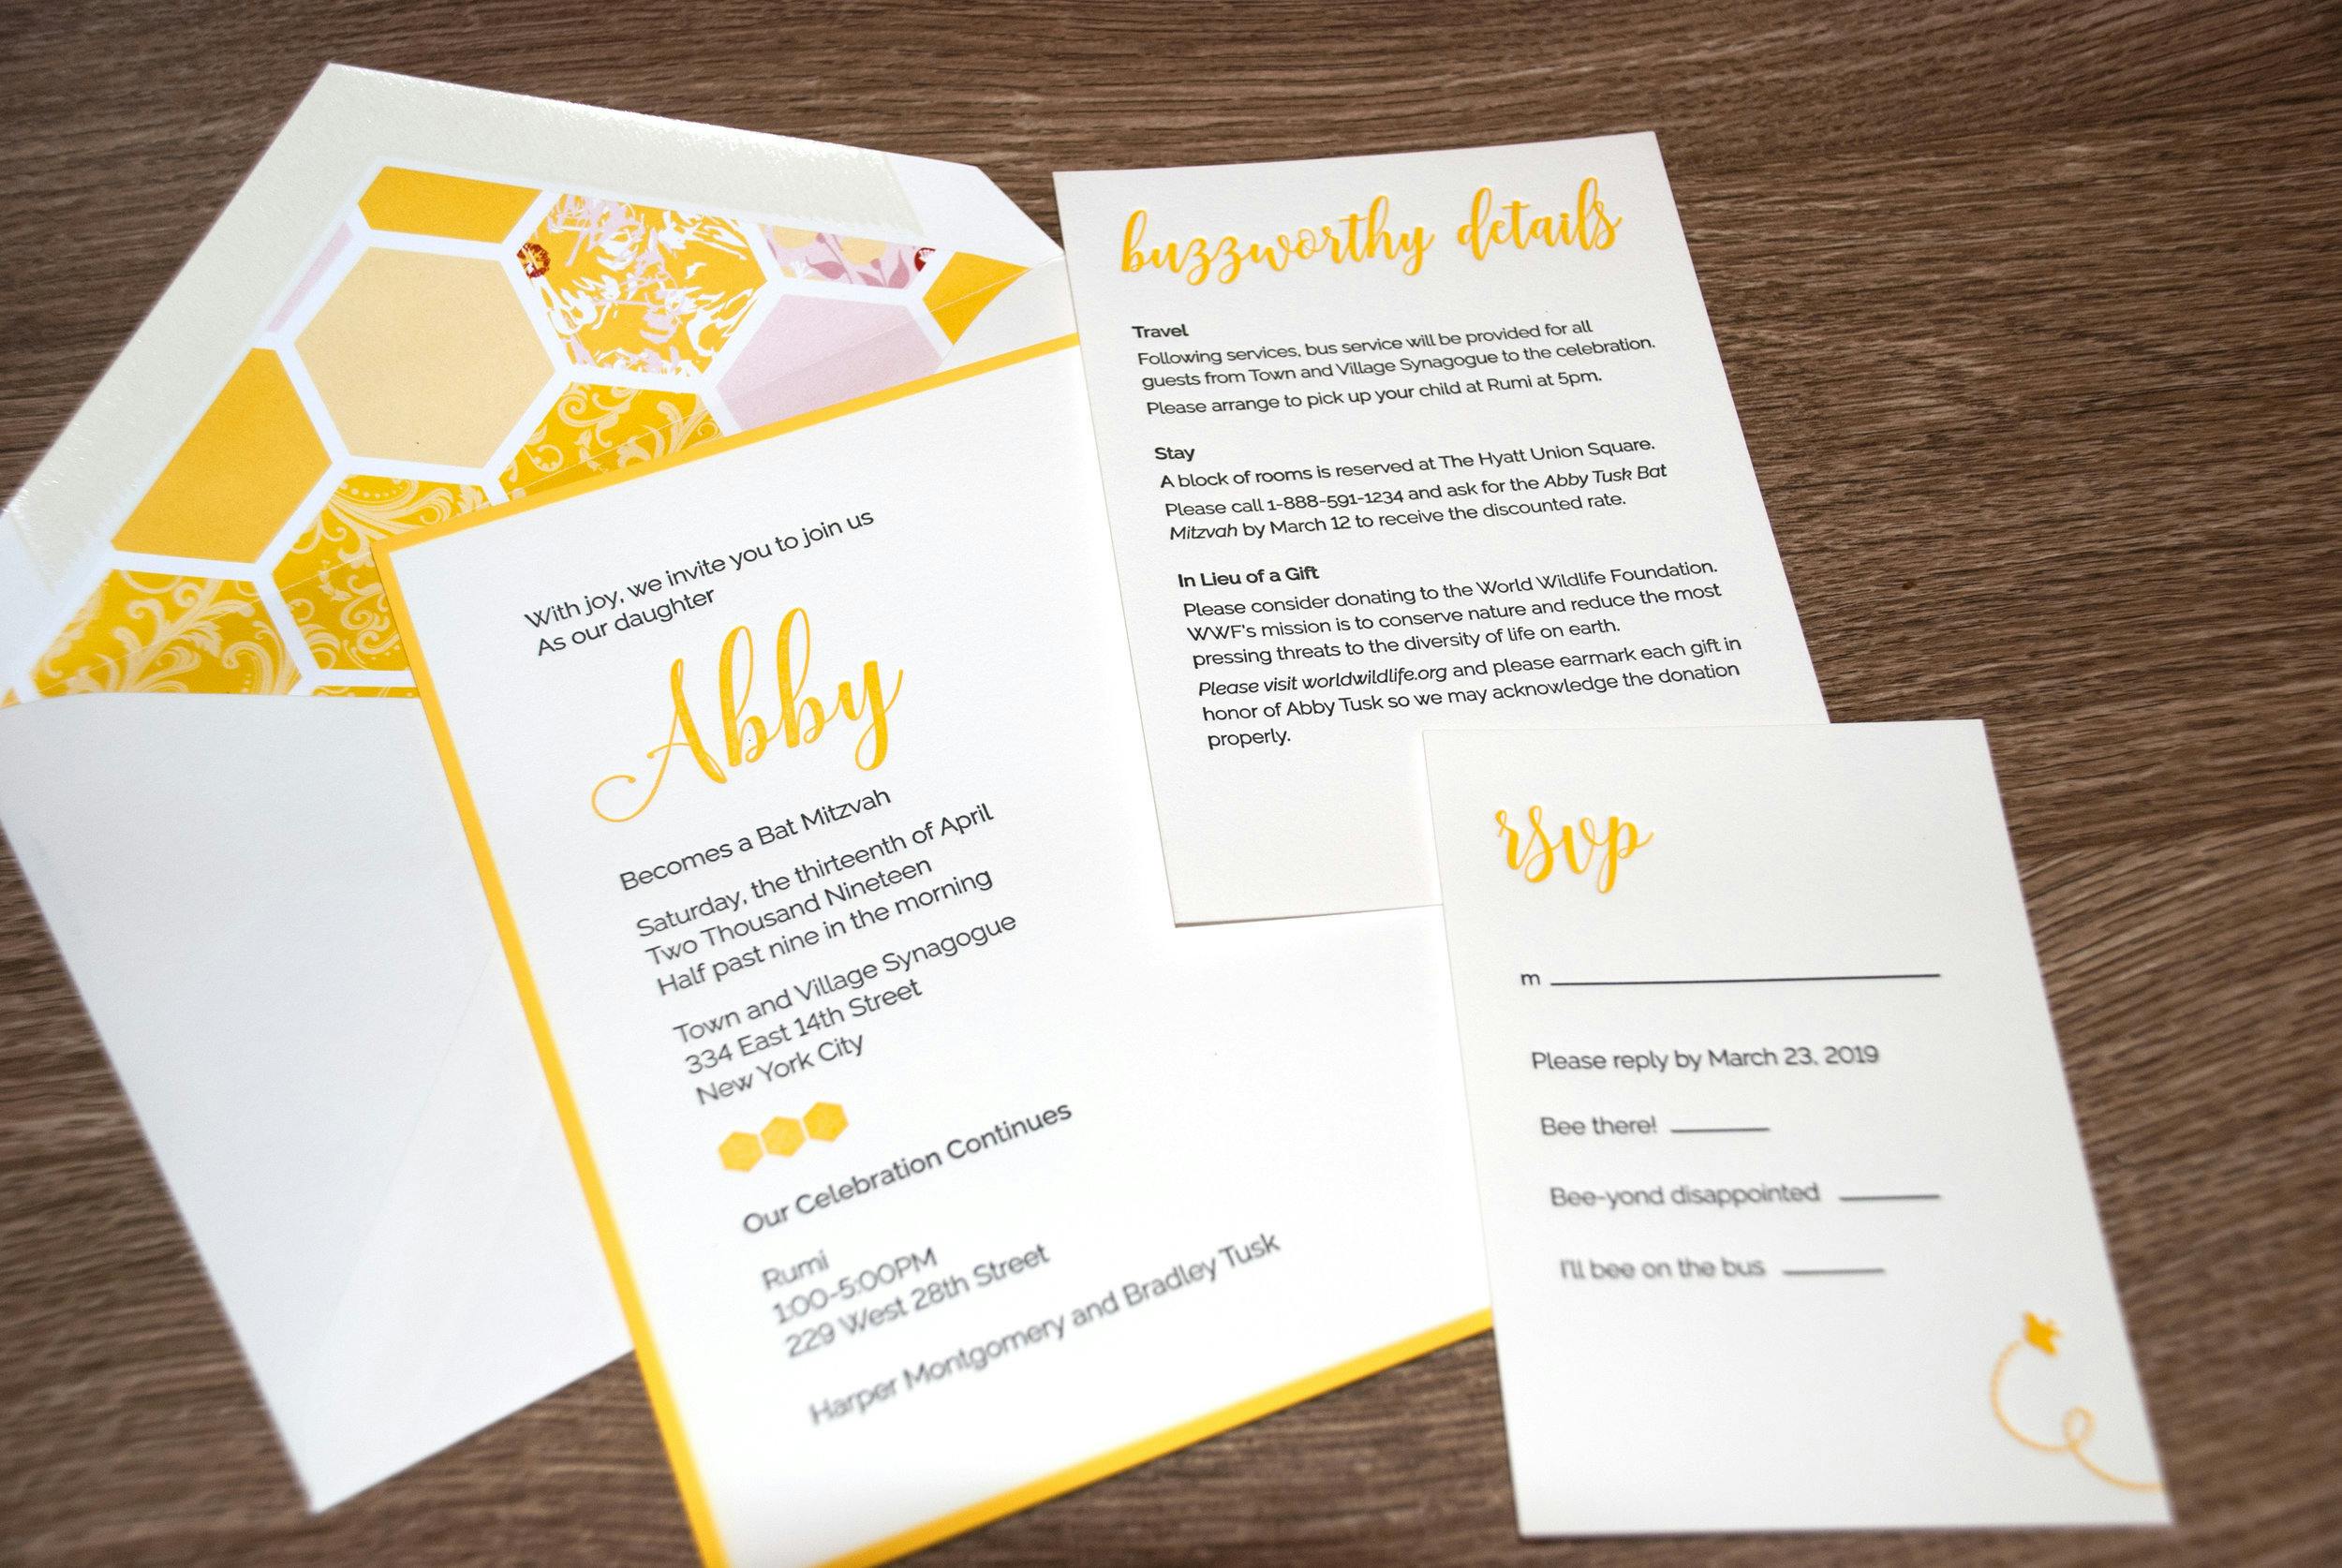 Bee themed invitation letters for Bat Mitzvah at Rumi Event Space in New York | PartySlate